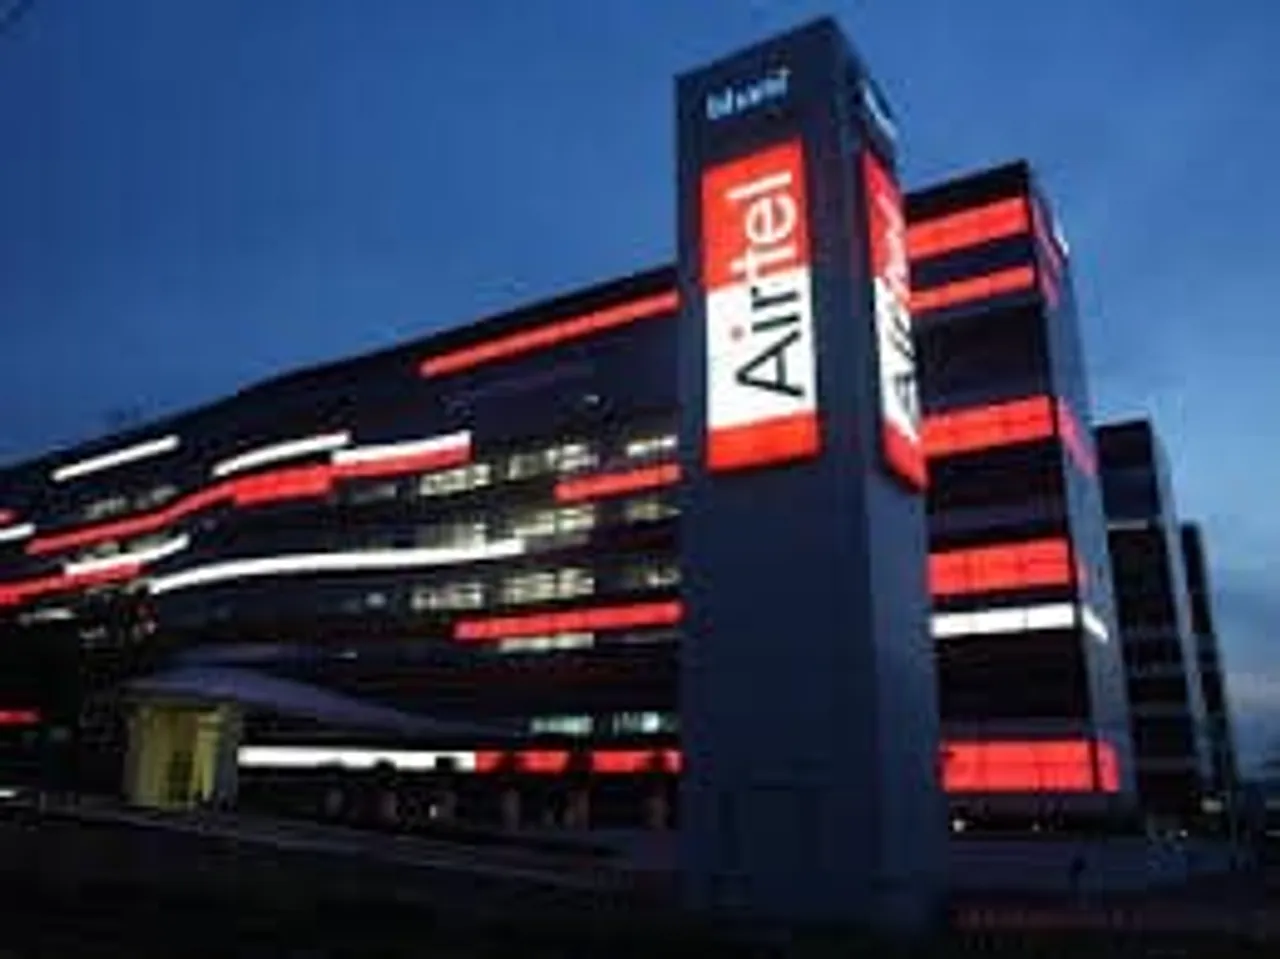 Airtel launches industry's first Telecom Infra Project Community Lab